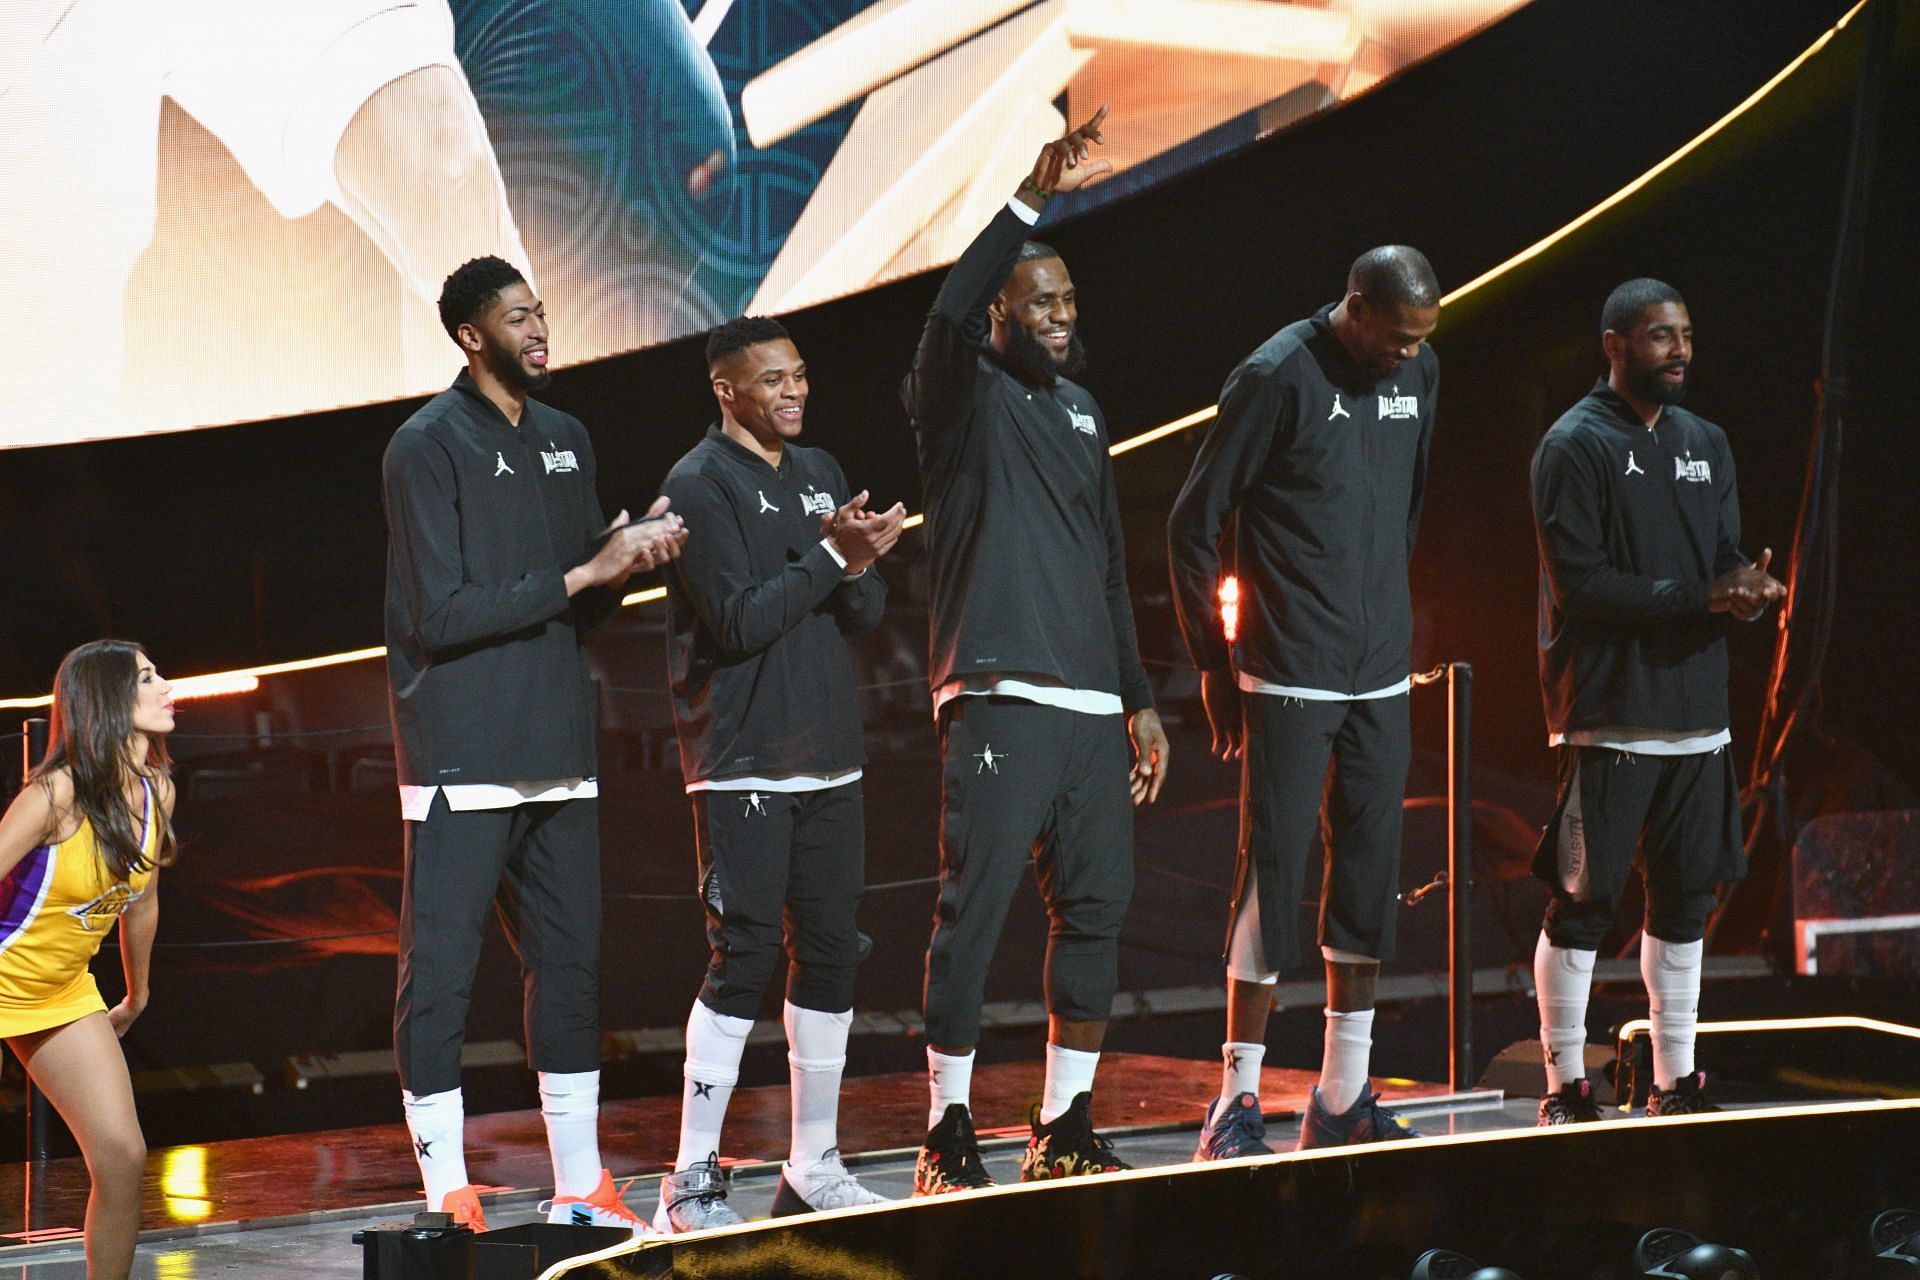 (L-R) Anthony Davis, Russell Westbrook, LeBron James, Kevin Durant and Kyrie Irving of Team LeBron attend the NBA All-Star Game 2018 in February 2018 in Los Angeles, California.